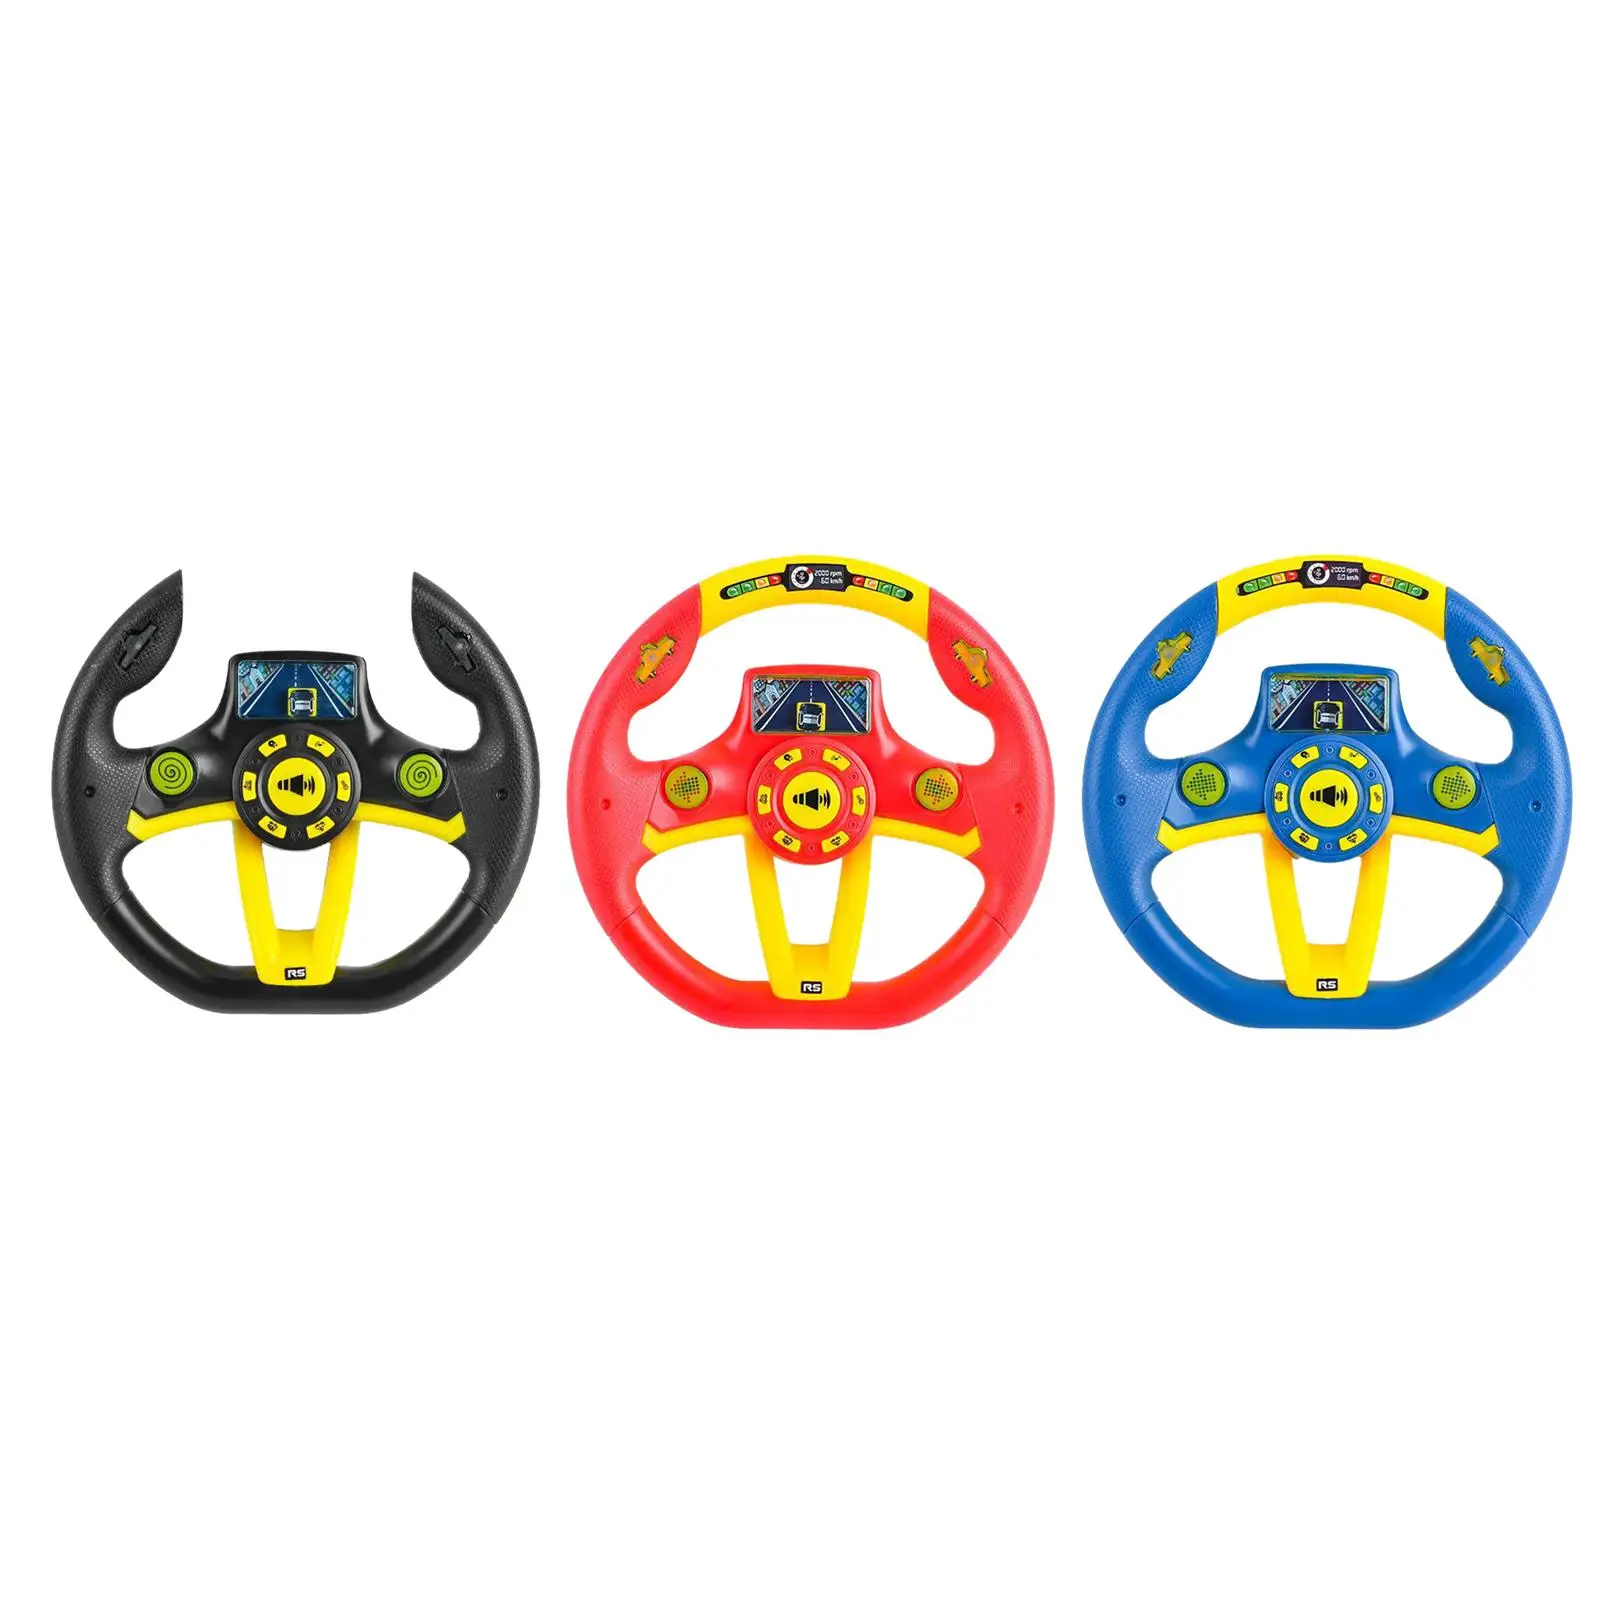 Round Steering Wheel Toy Battery Powered for Playground Busy Board Treehouse